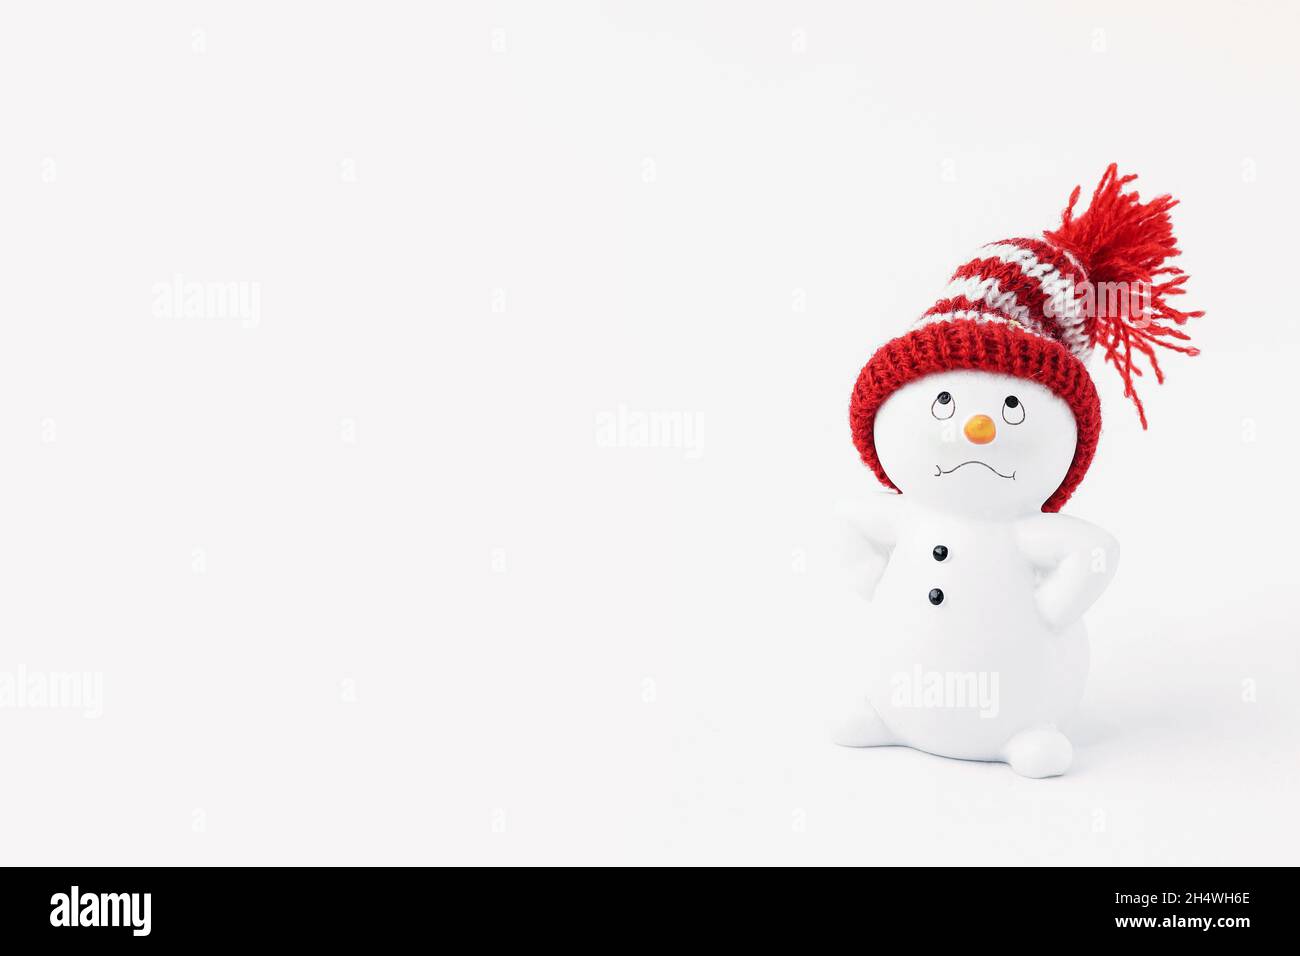 Business important snowman standing isolated on white background. Merry christmas and happy new year greeting card. Funny snowman in hat on snowy back Stock Photo